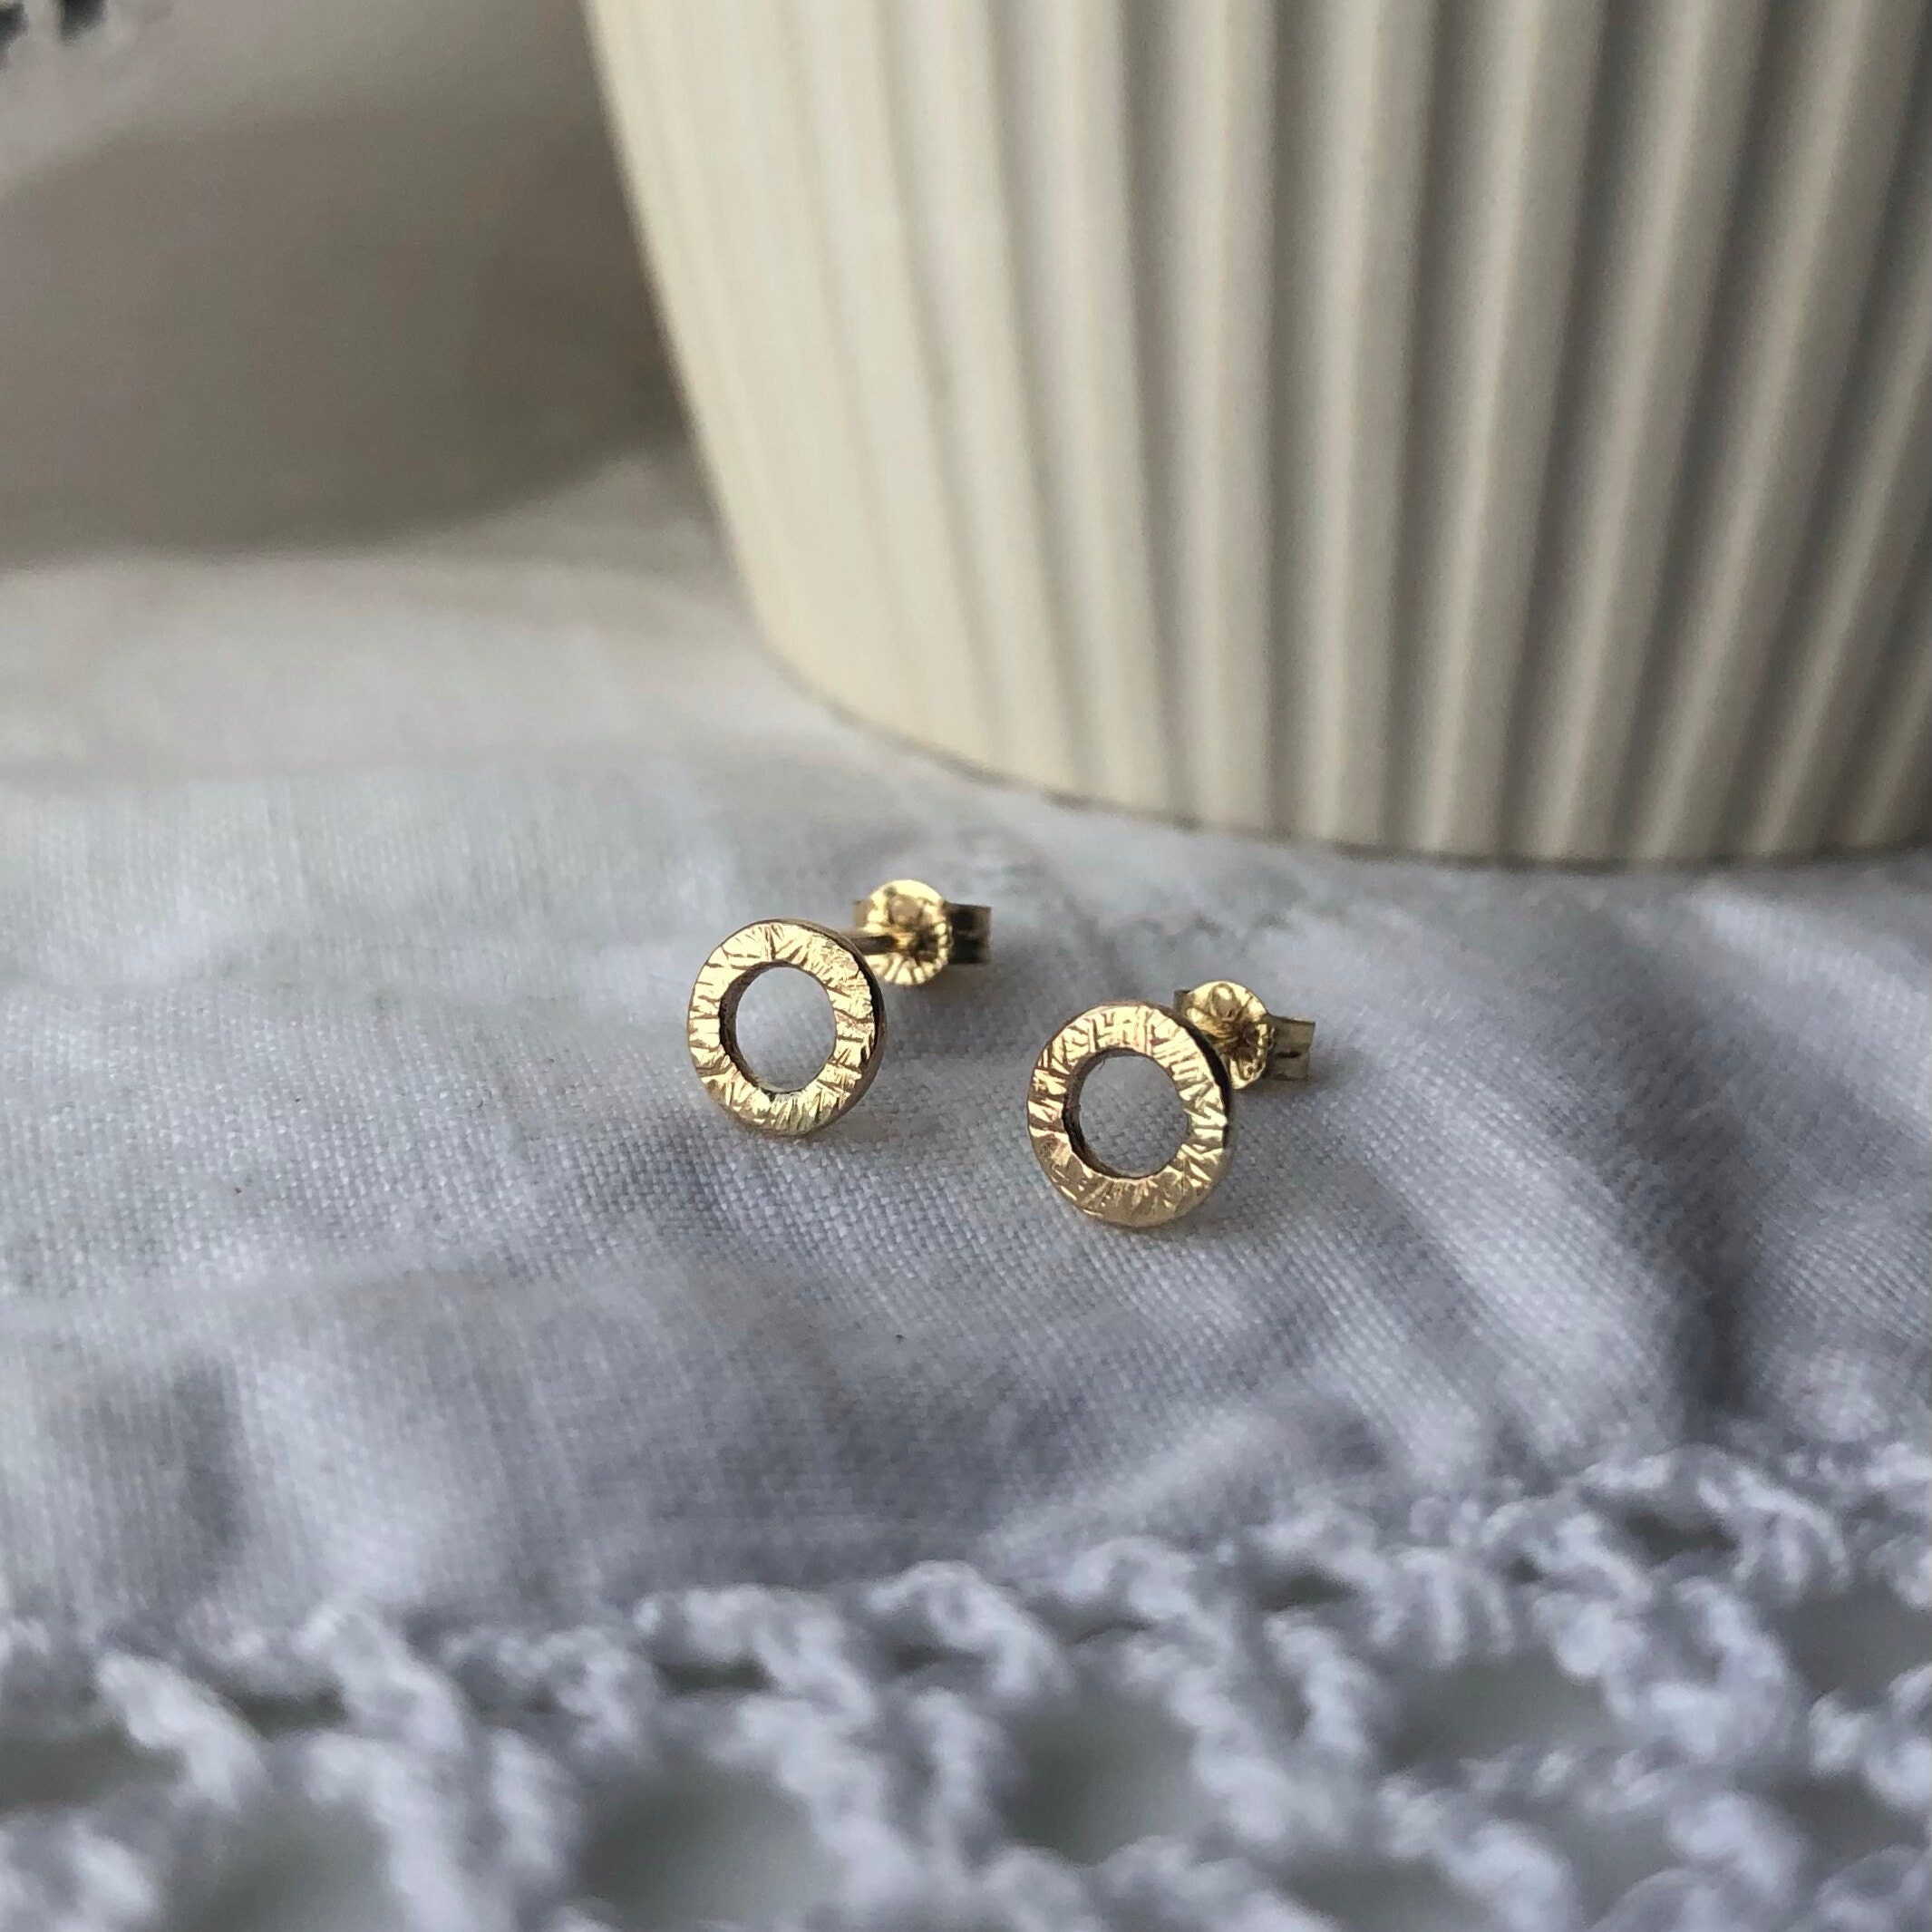 Recycled Gold Textured Circle Stud Earrings, Solid Gold Delicate Studs, Sustainable Hand Made Jewellery, Gifts For Her